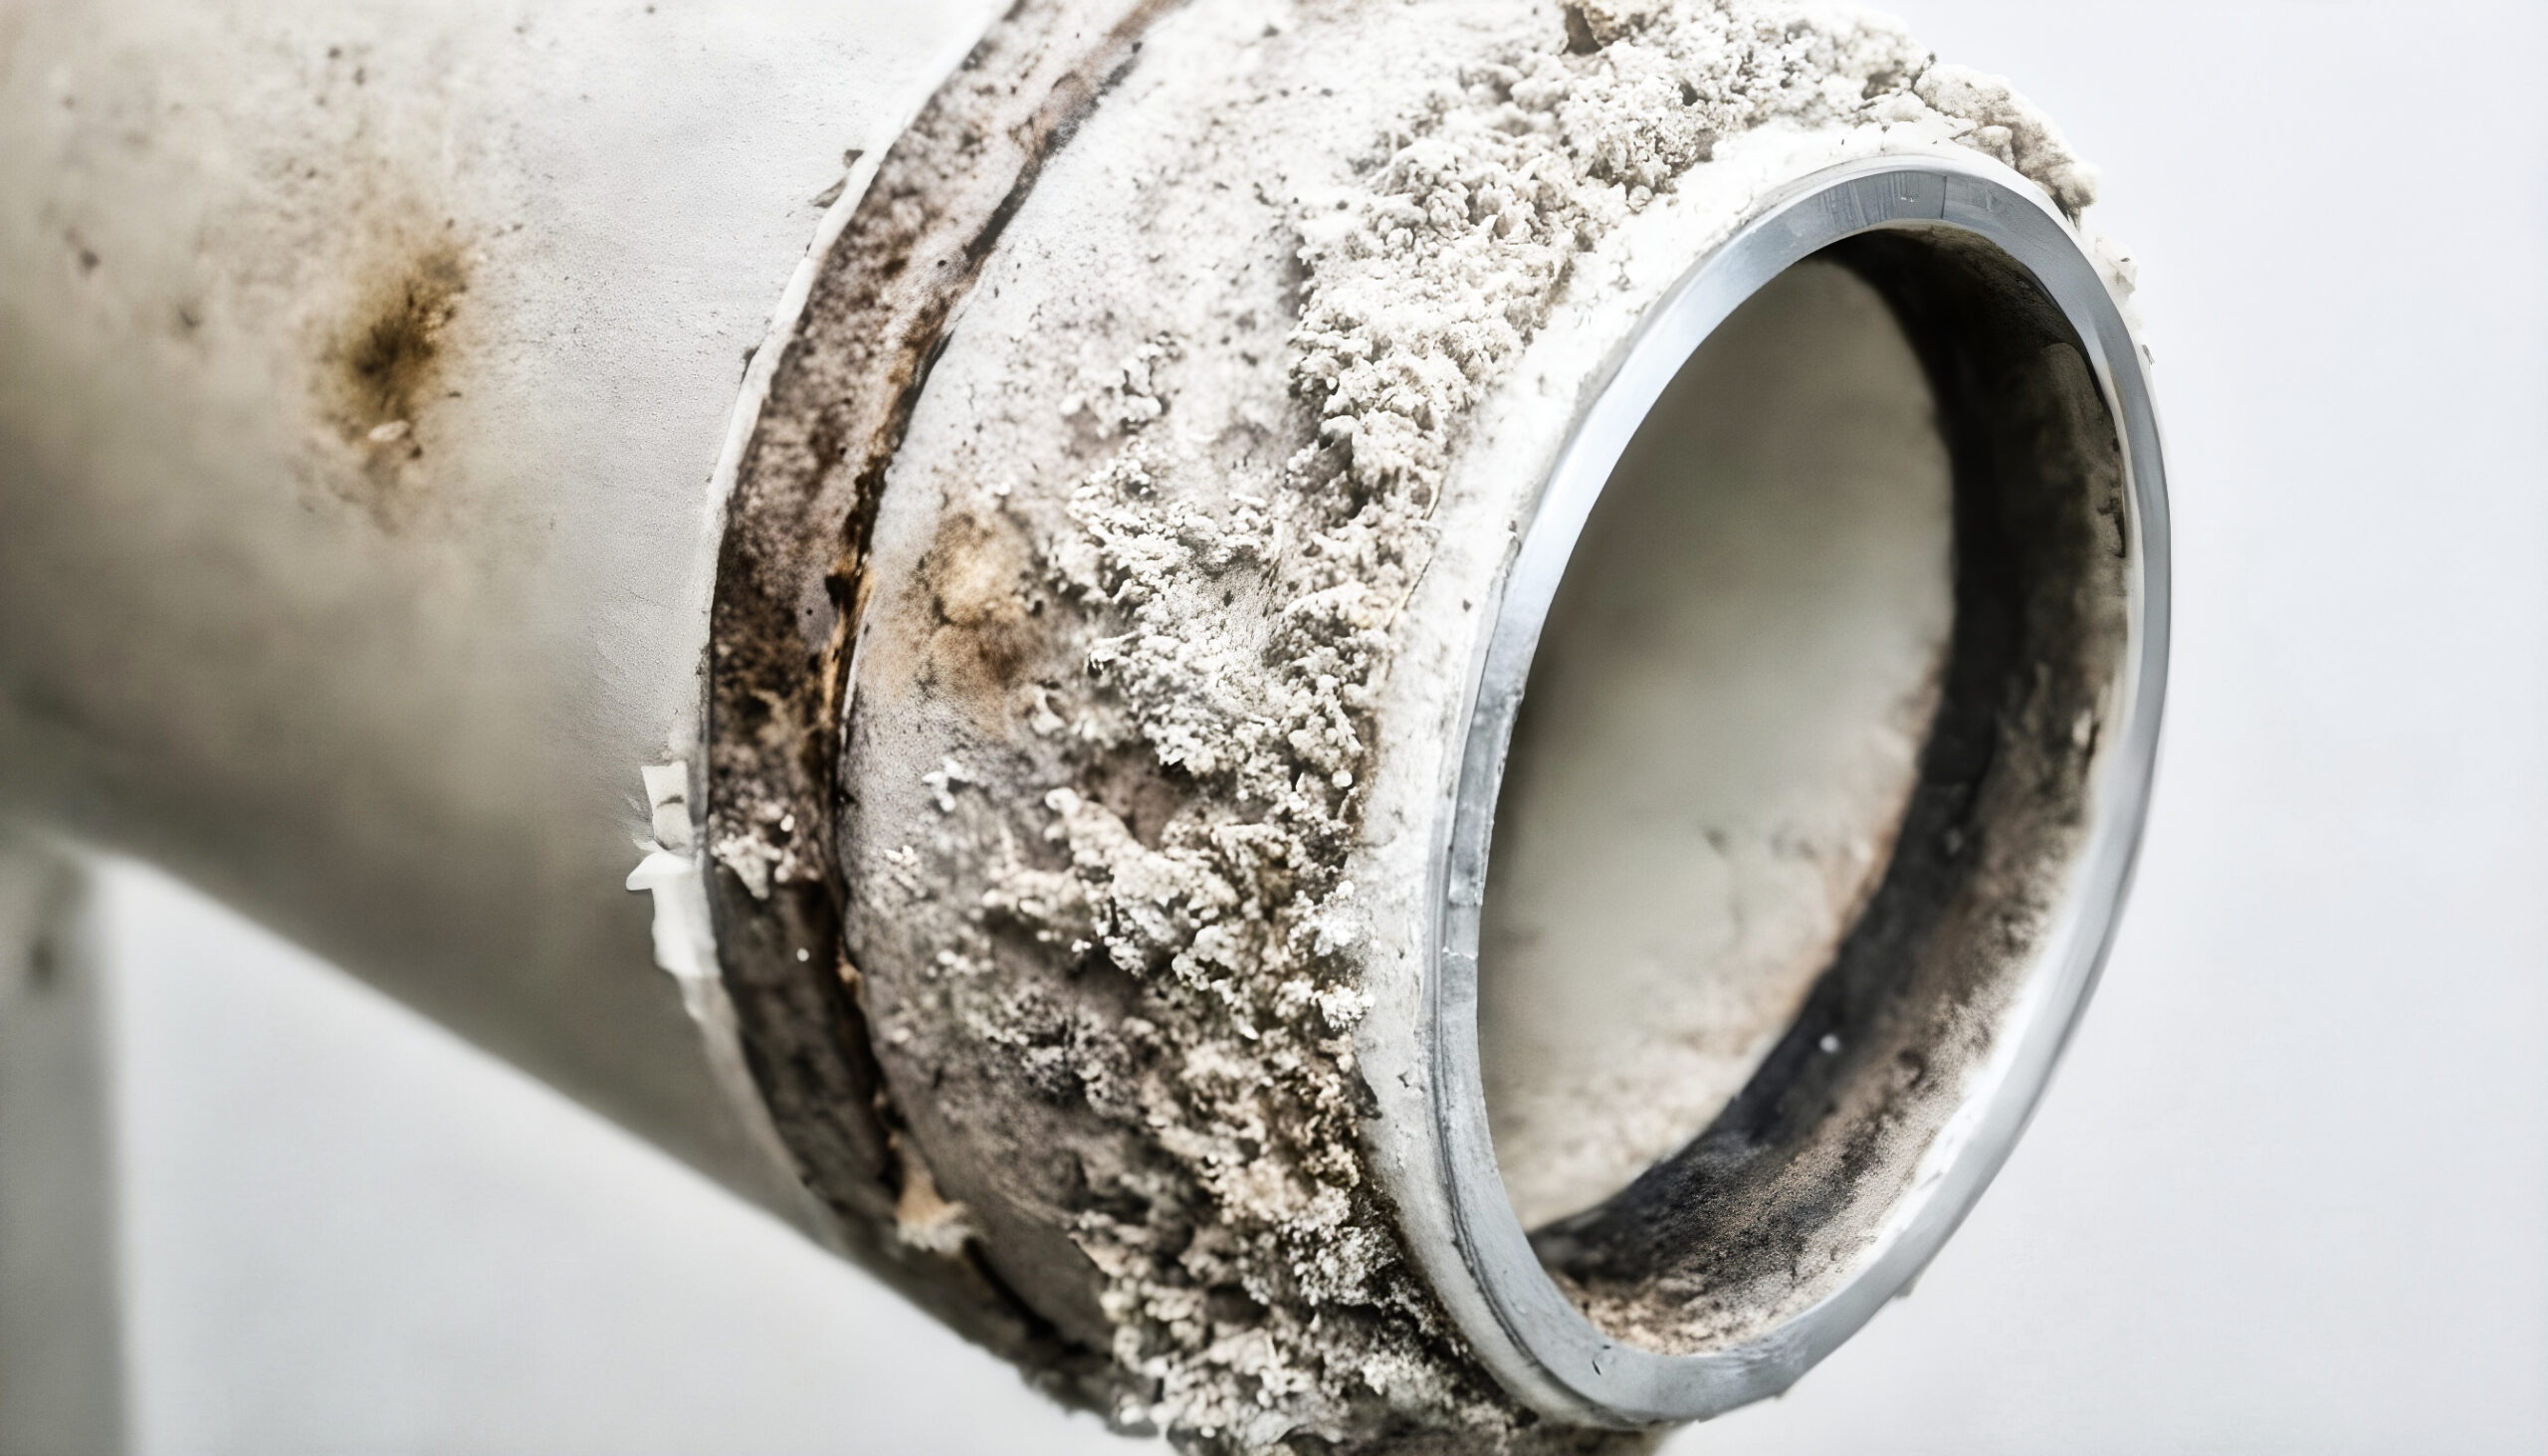 Georgetown Washer Repair: Tips for Addressing Hard Water Appliance Issues